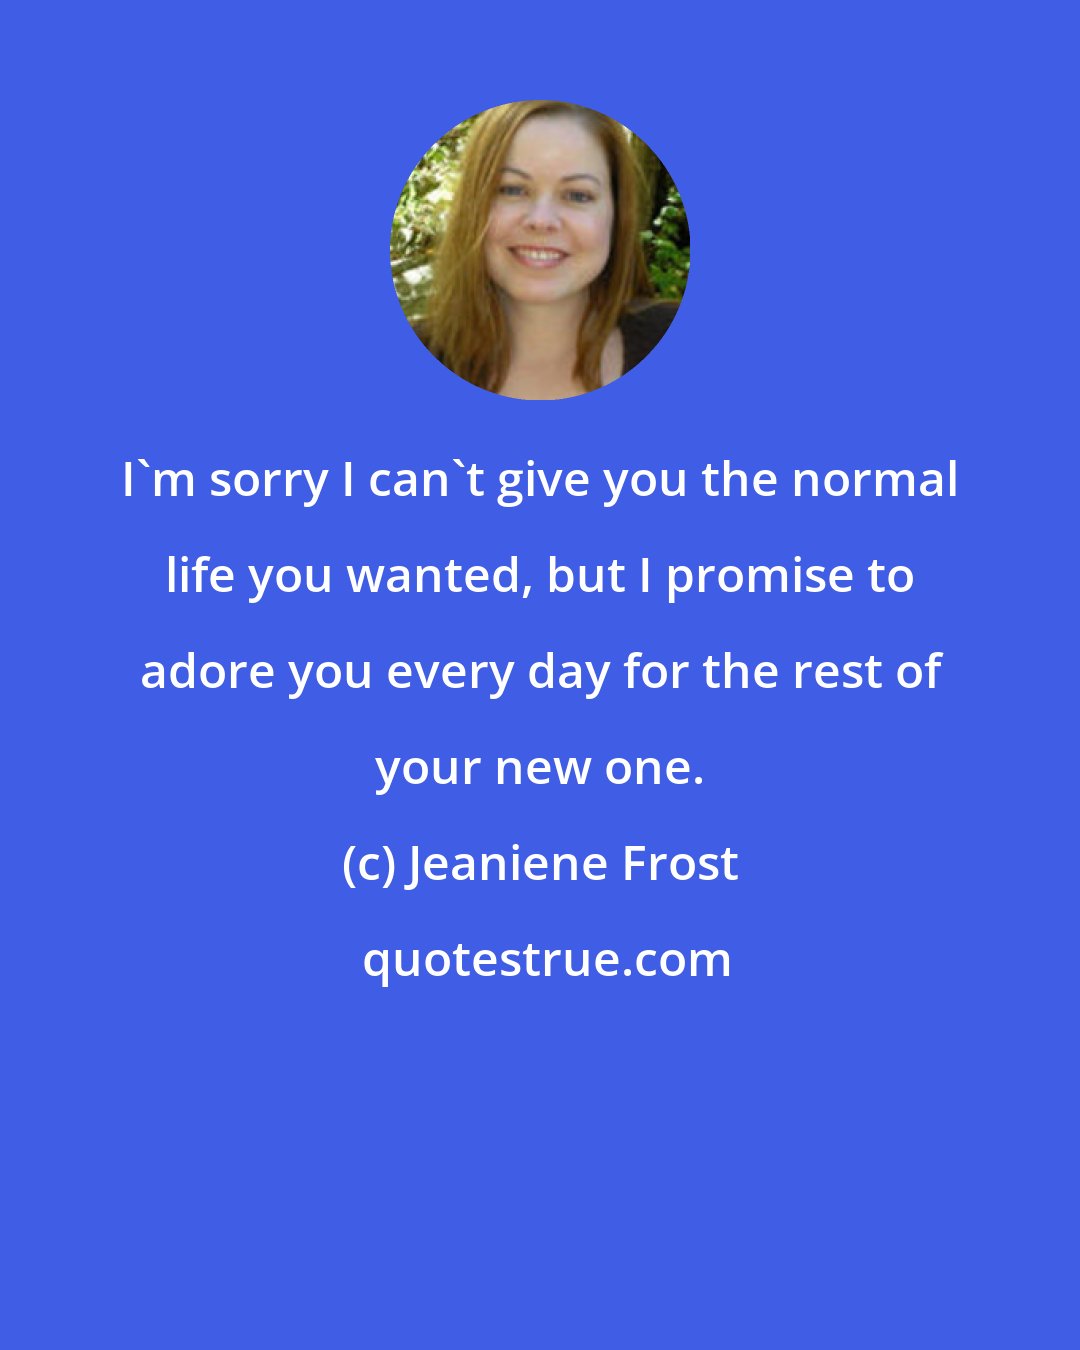 Jeaniene Frost: I'm sorry I can't give you the normal life you wanted, but I promise to adore you every day for the rest of your new one.